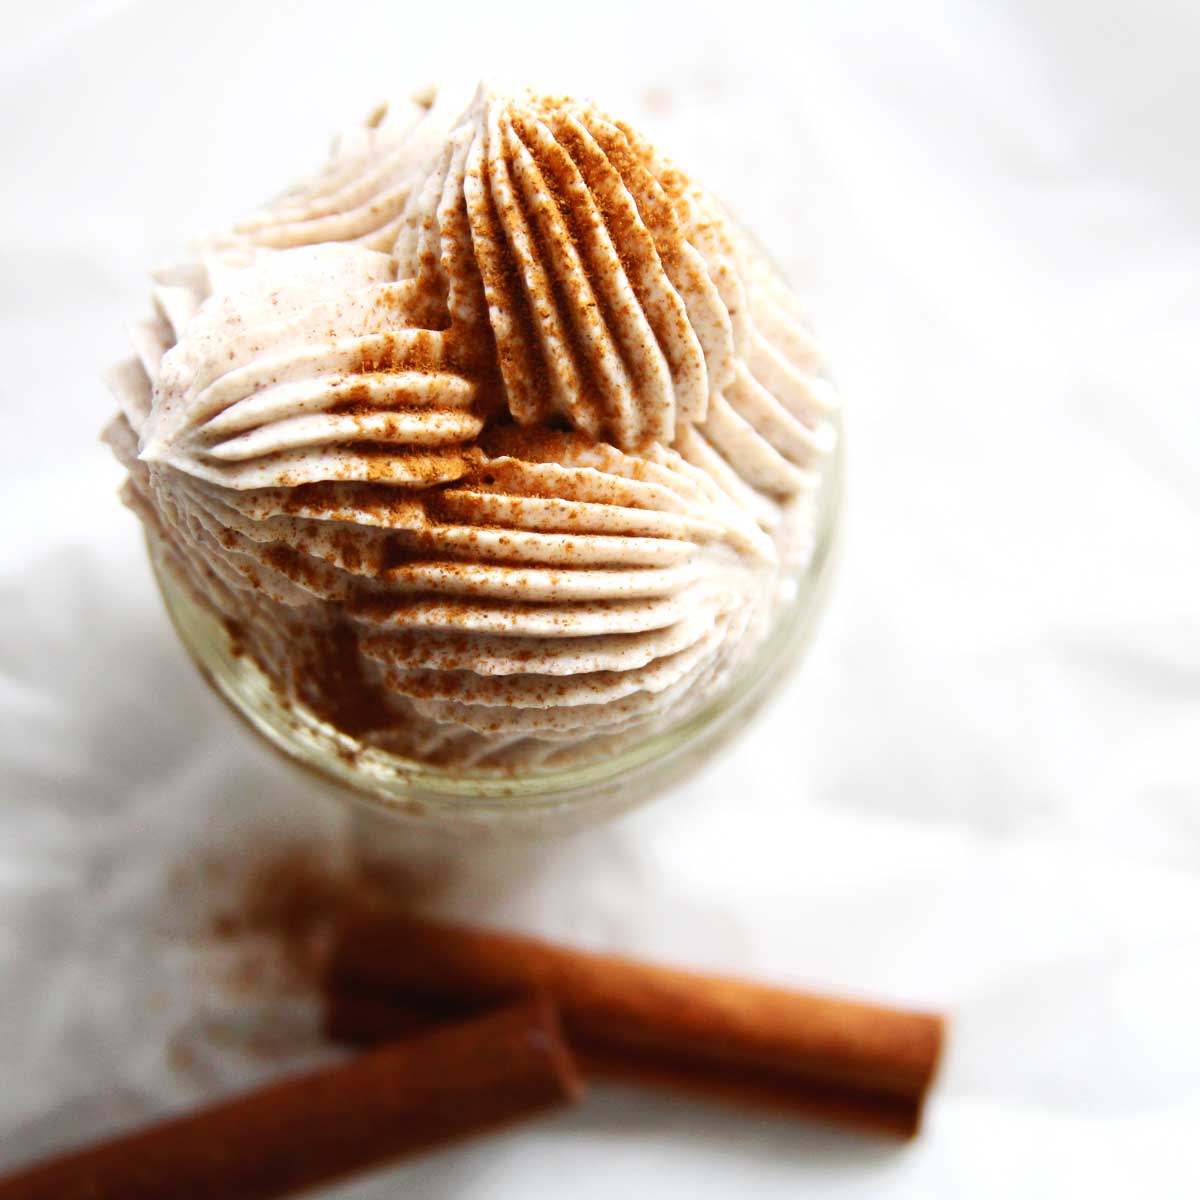 Sweet & Spicy Cinnamon Whipped Cream Recipe (Stabilized with Cream Cheese) - Brown Sugar Whipped Cream